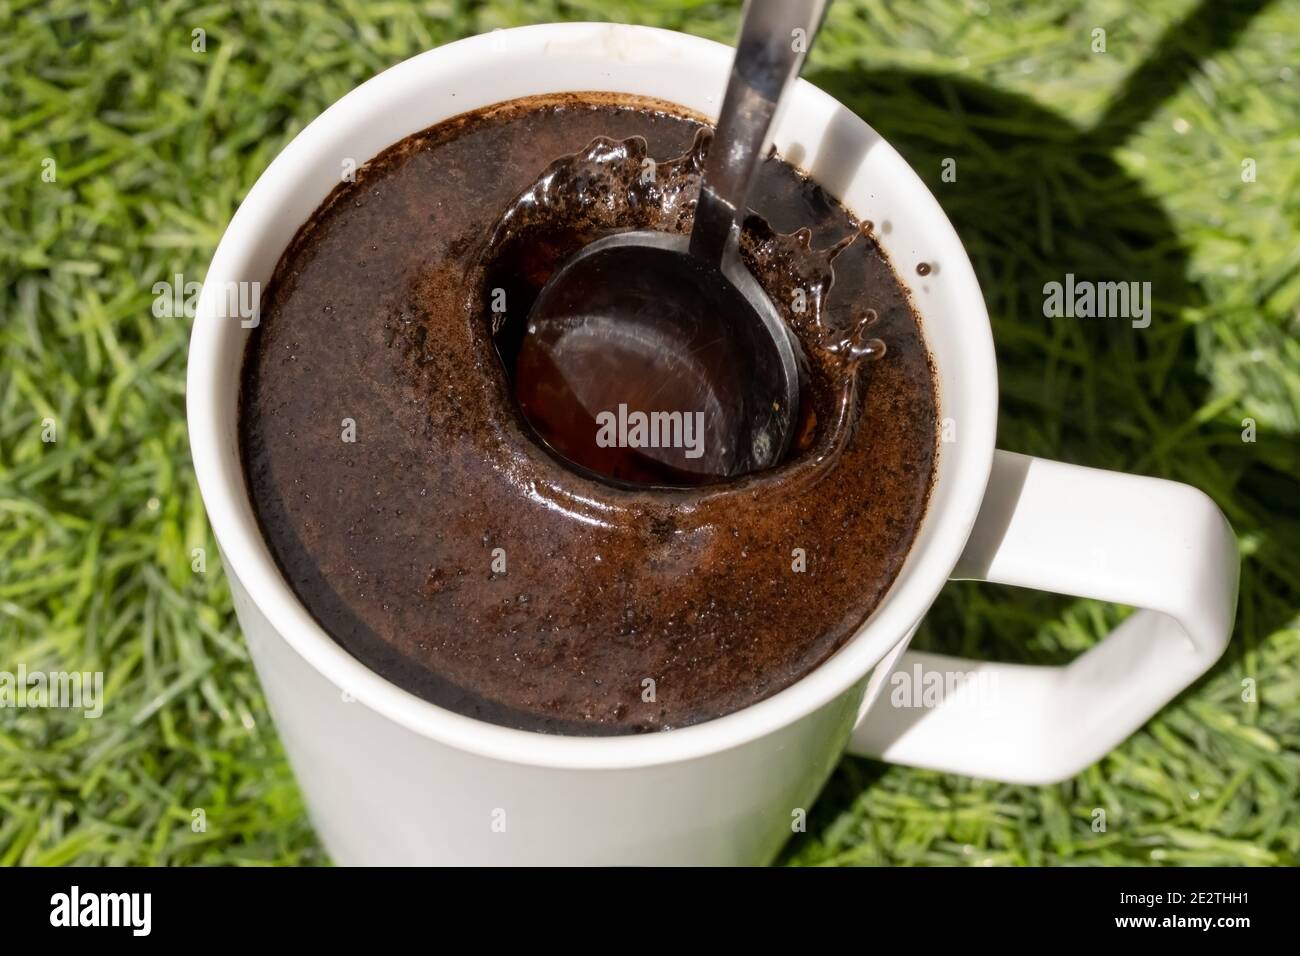 A teaspoon fall down into a cup of coffee, close up view. A spoon is throw into drink. Stock Photo